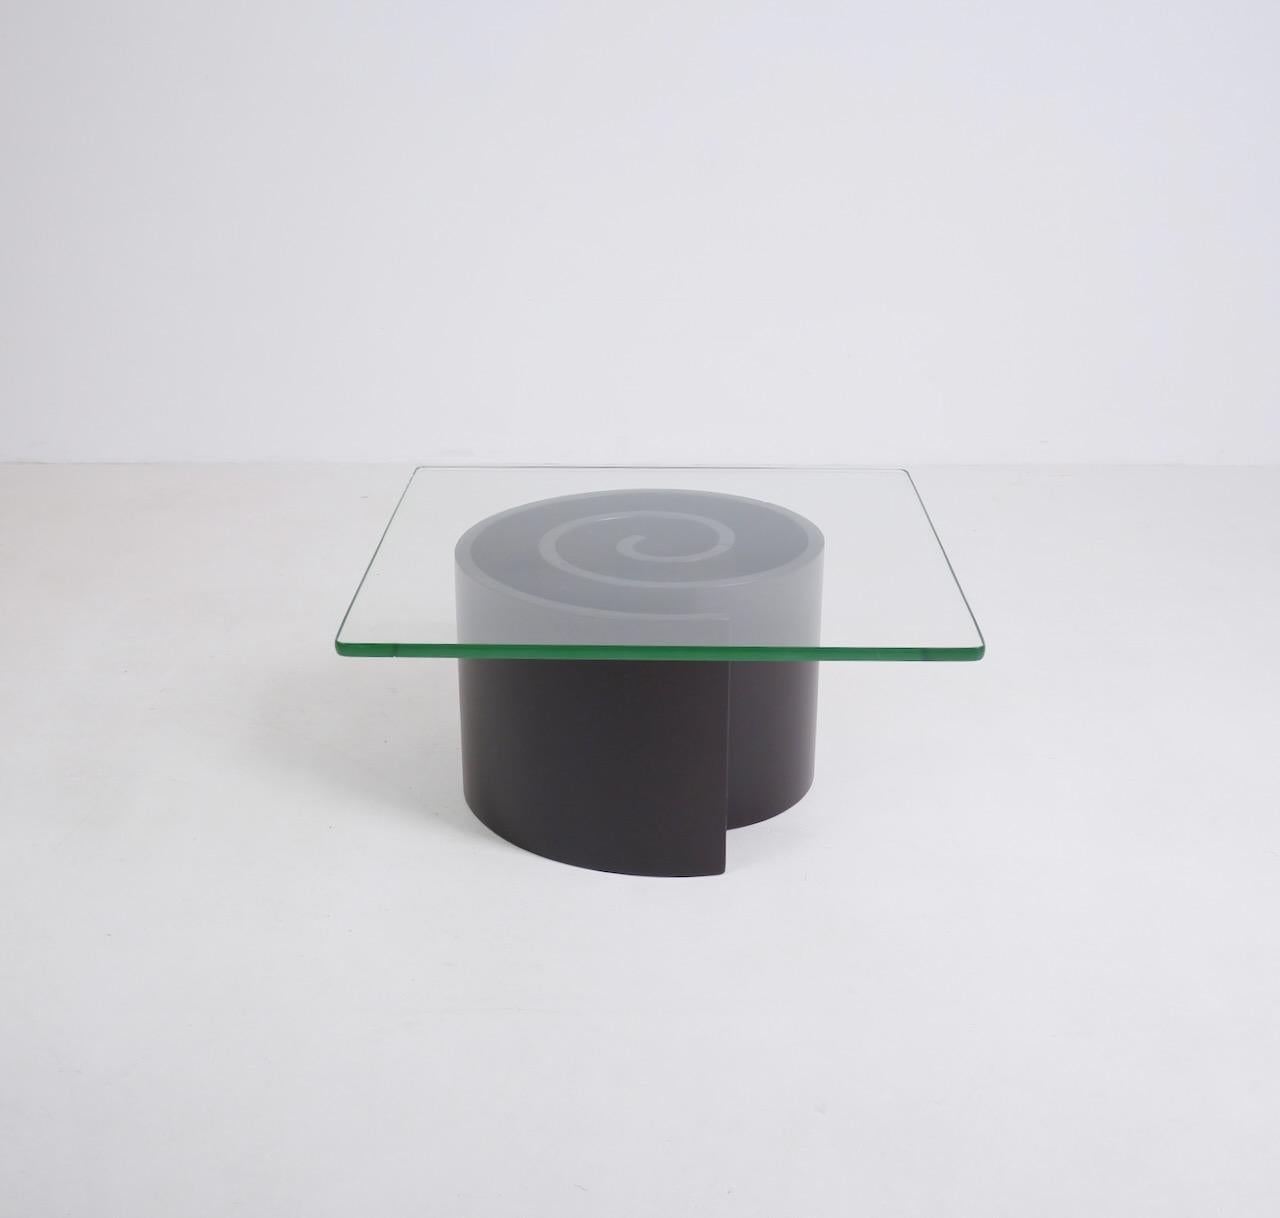 A deep brown lacquered spiralling wood and glass coffee table after Vladimir Kagan’s snail table. The base is composed of 4 separate curved wooden components that hook together to form a spiral. The glass top is very thick.

Dimensions (cm,